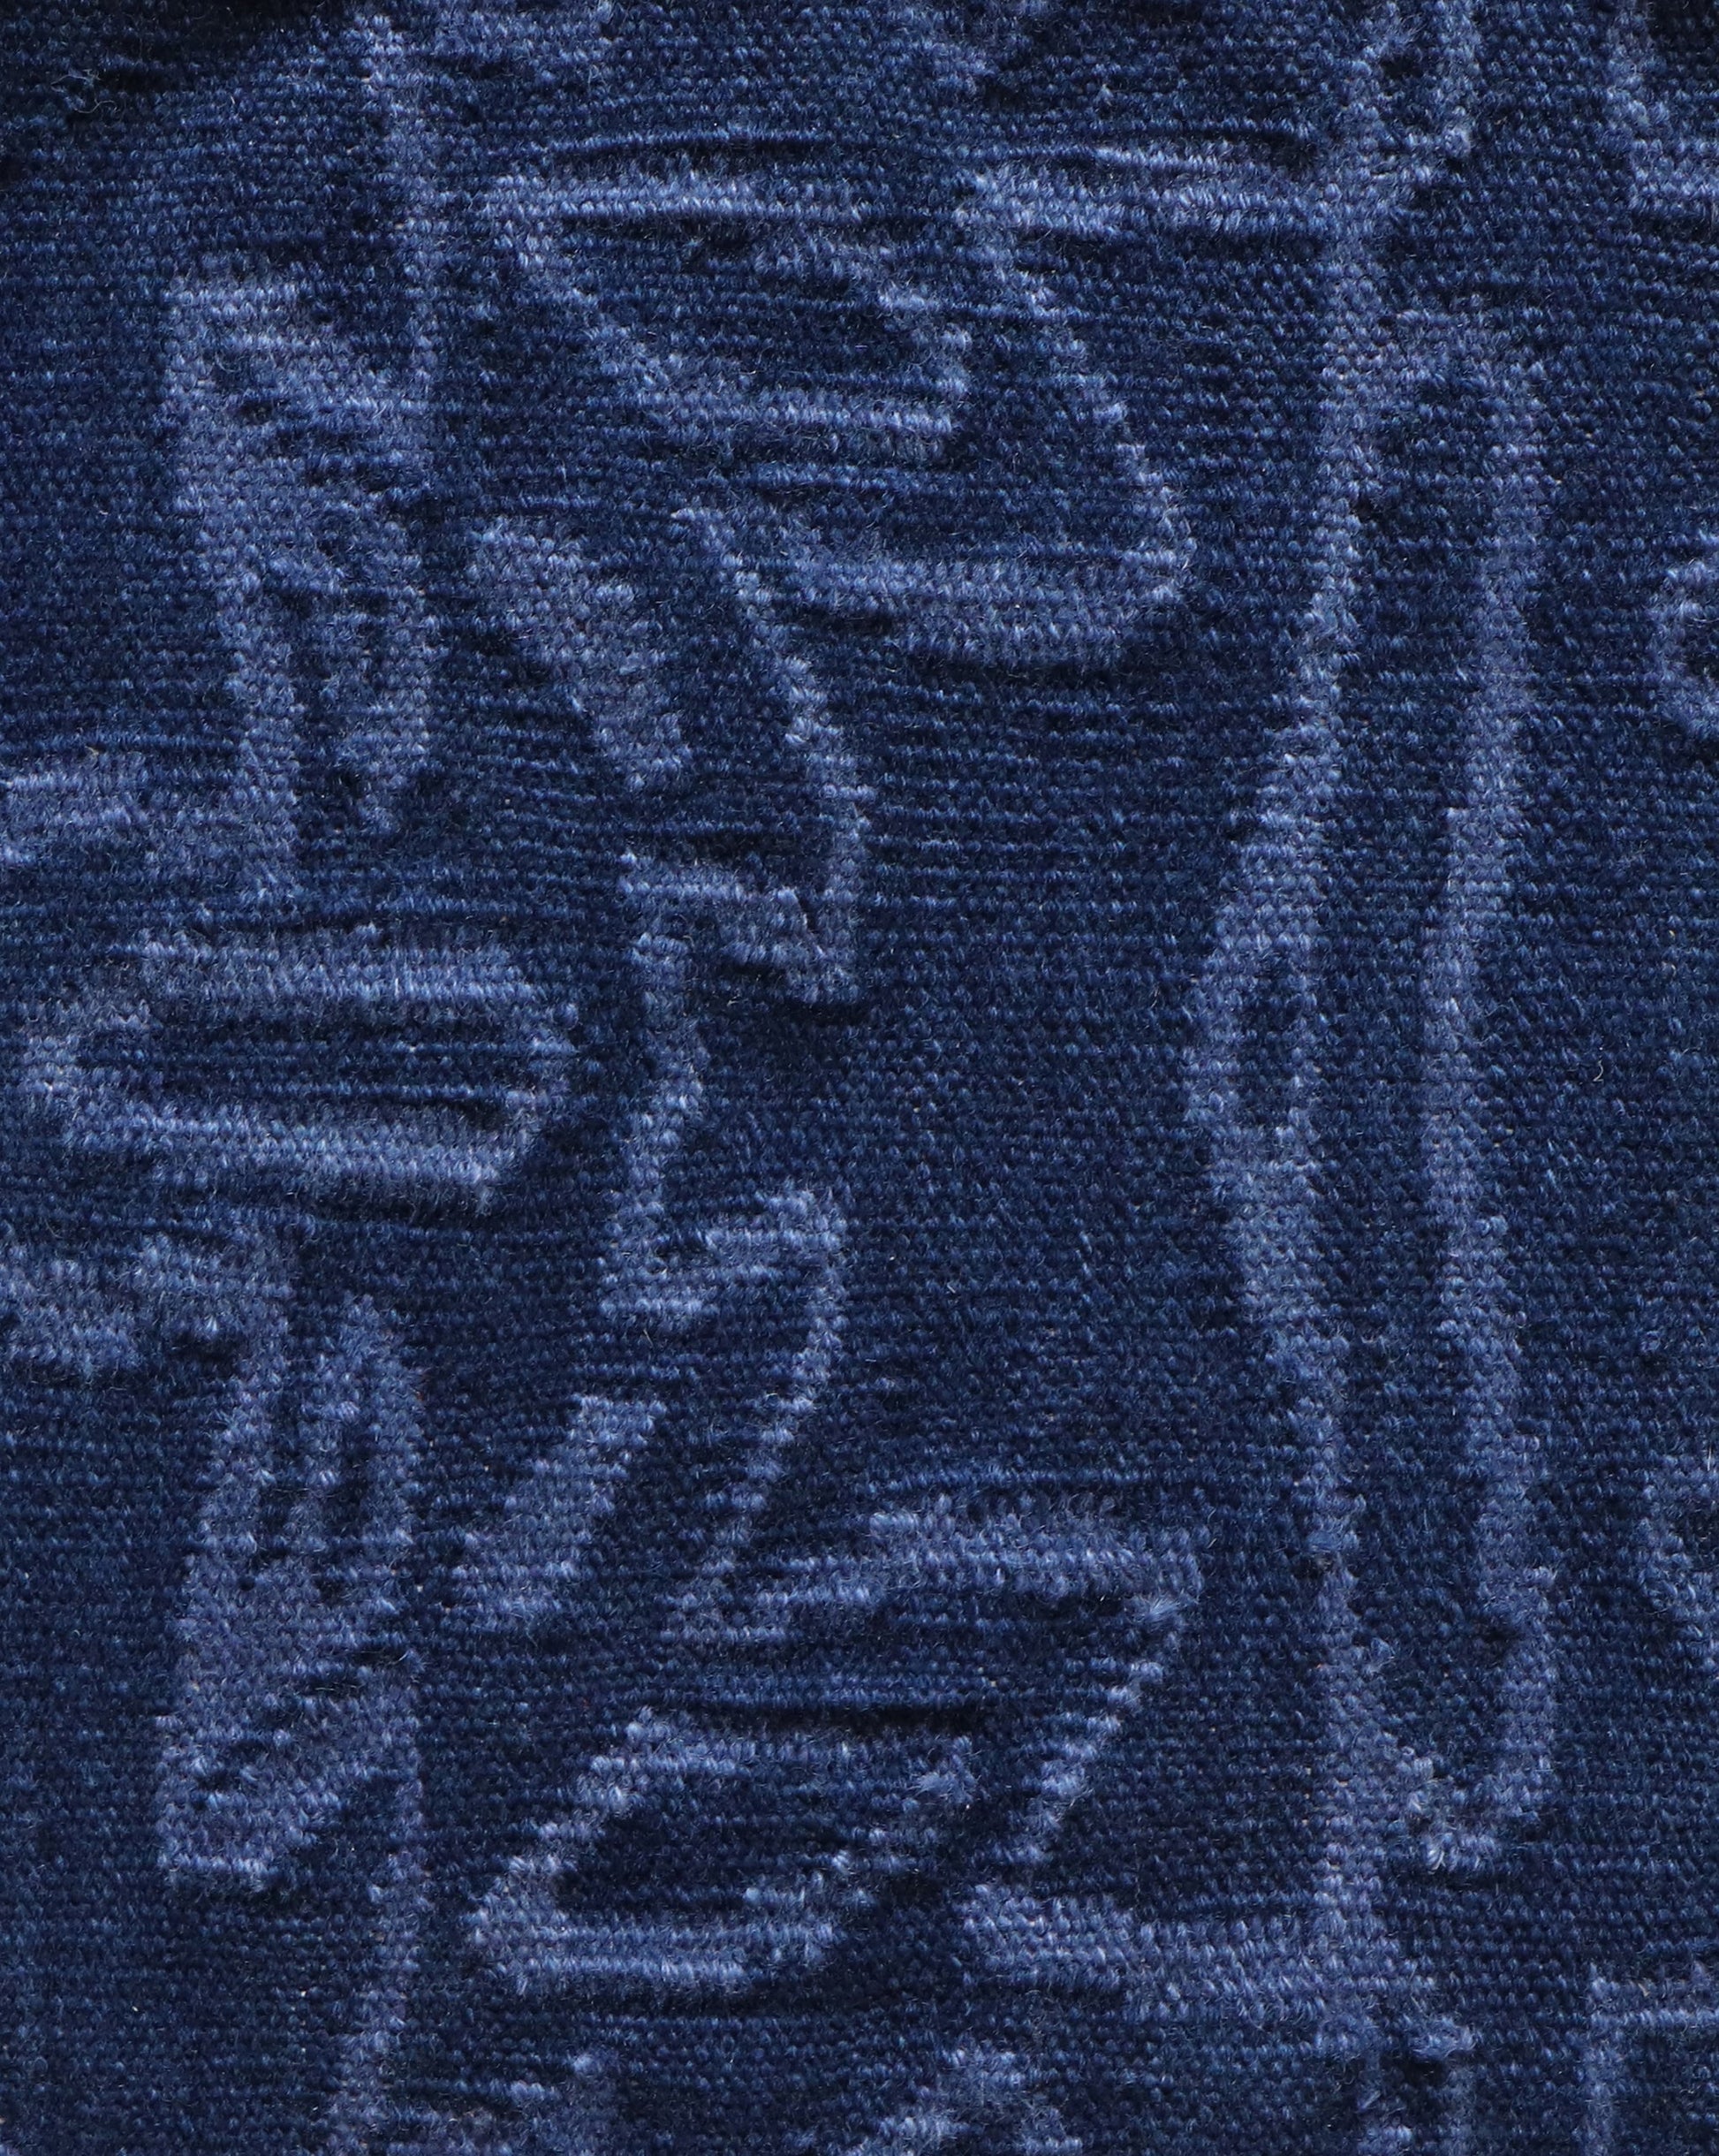 A close up of an Akimbo 5 Flatweave Rug Indigo with a graphic geometric pattern on it